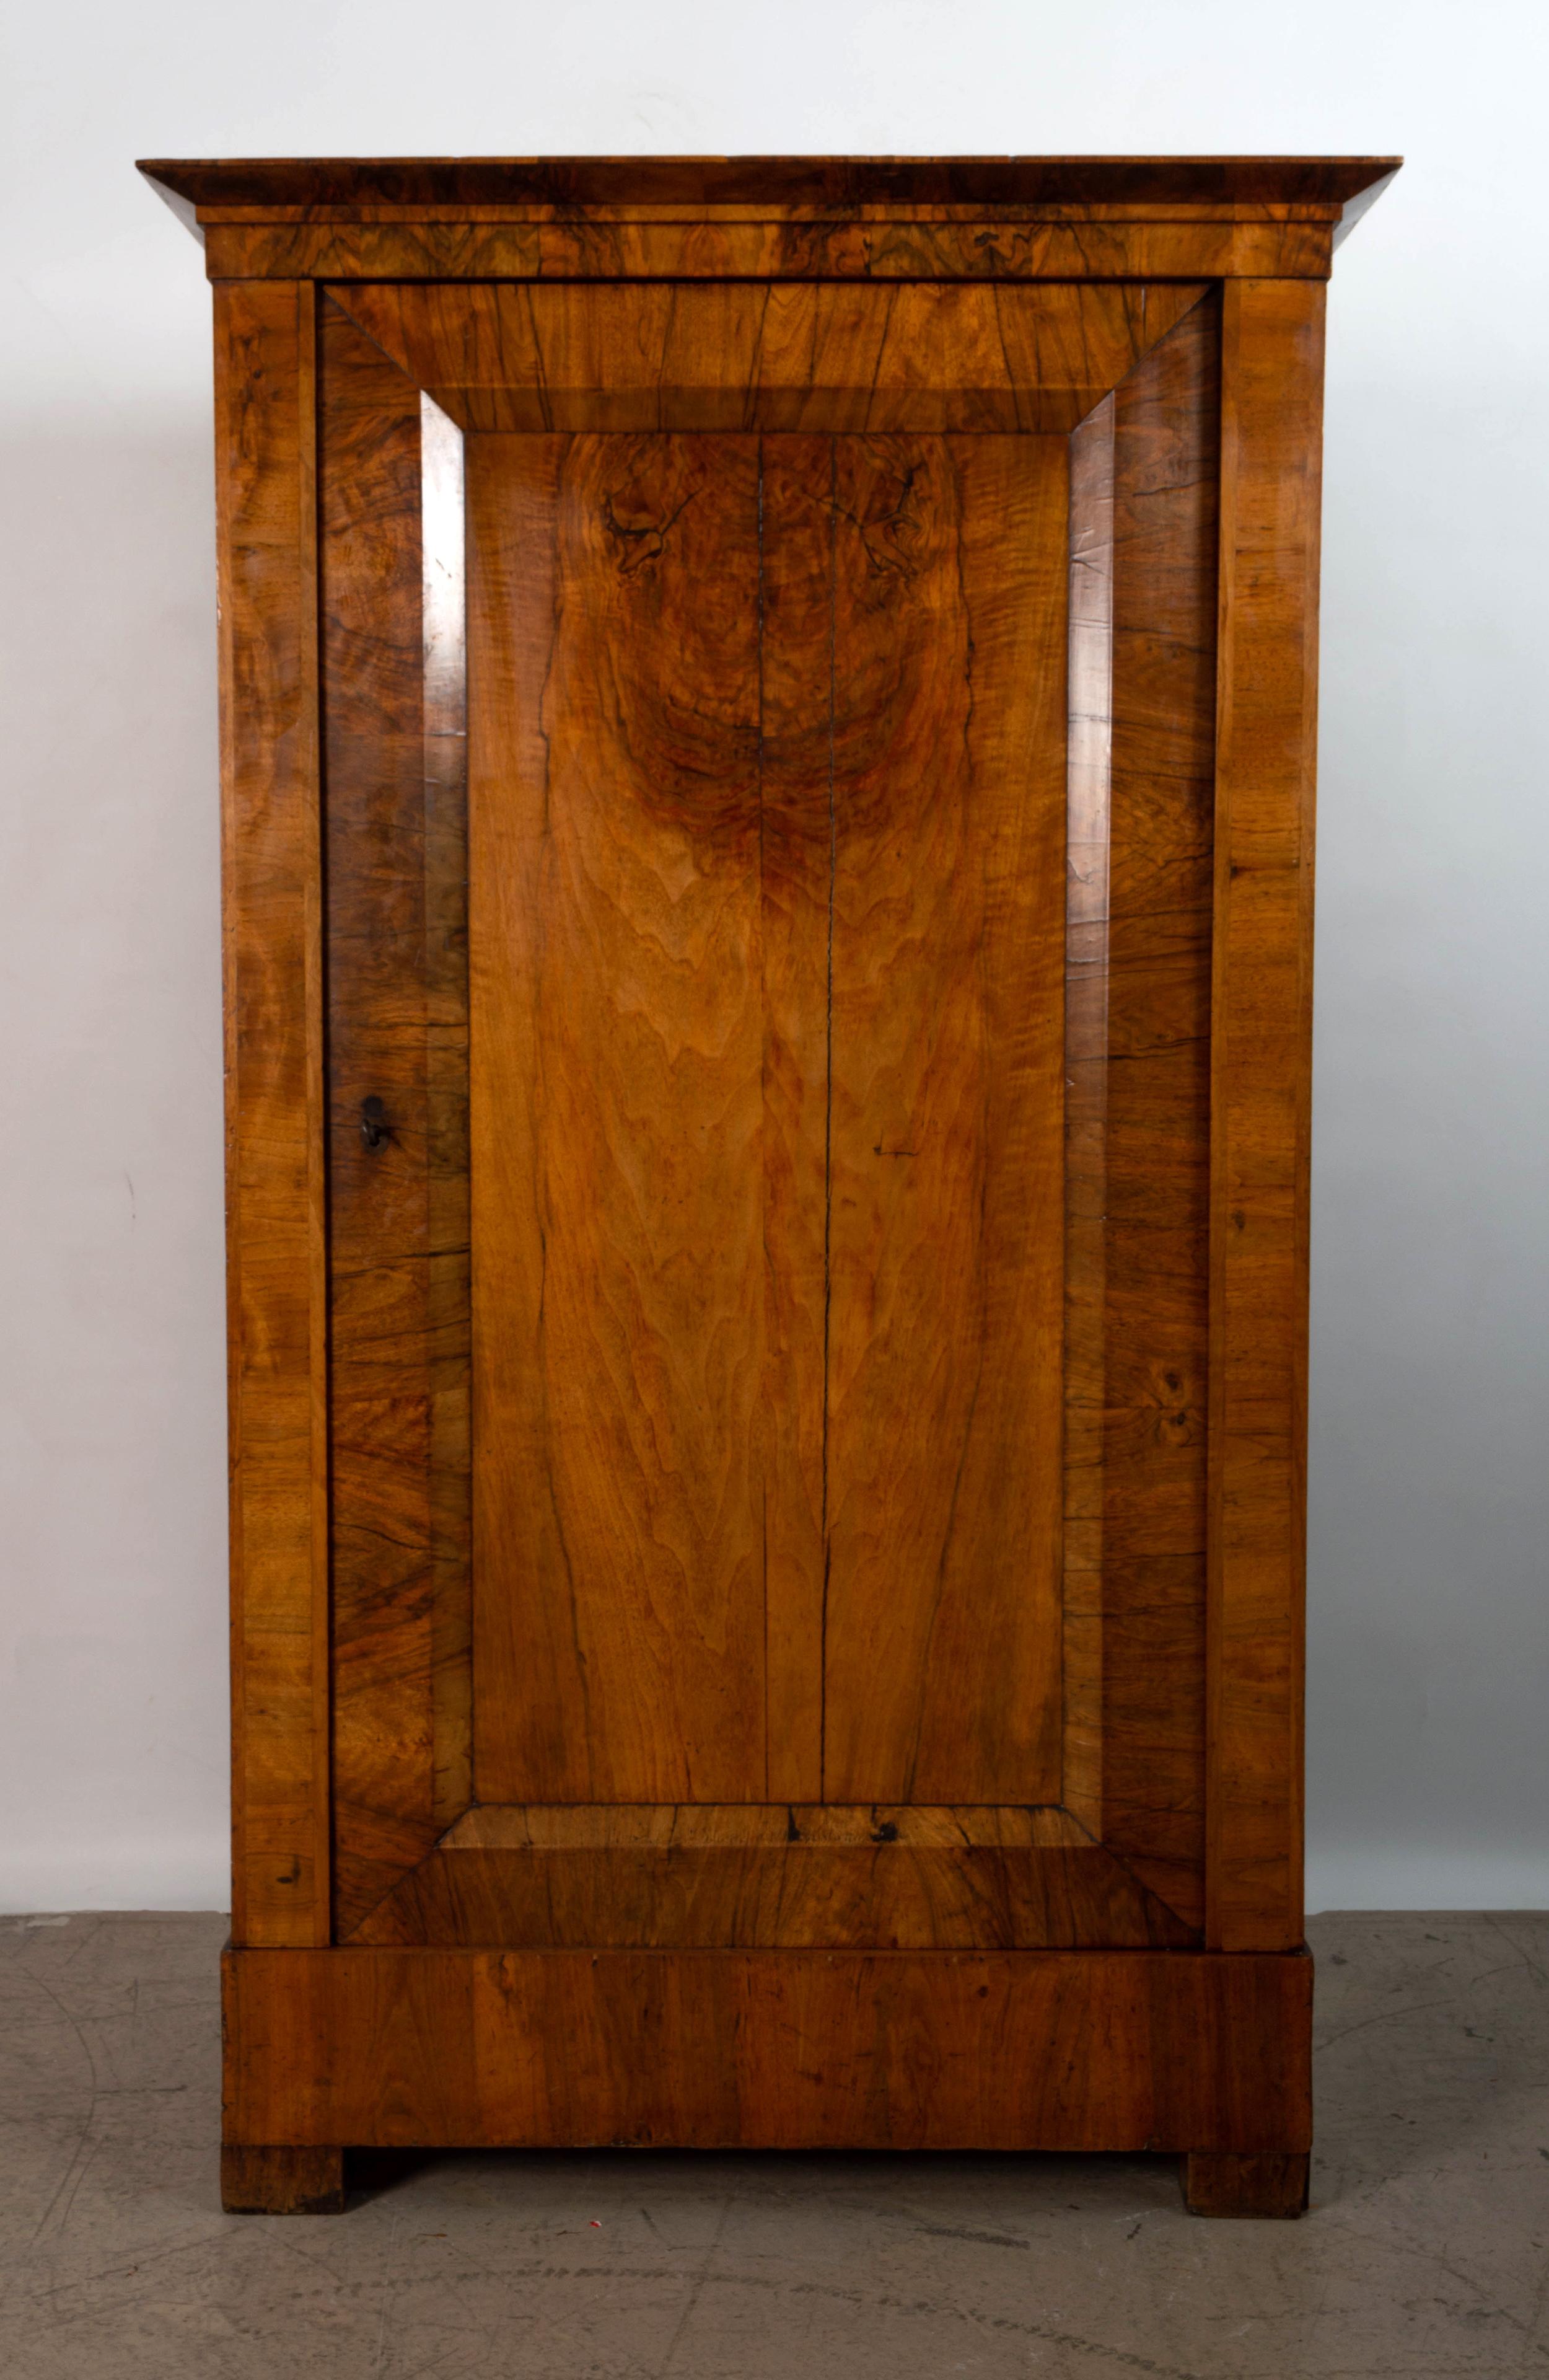 Antique 19th Century Danish Figured Walnut Cabinet Cupboard C.1860

A Danish panelled single door cabinet. Constructed from the most striking figured walnut.

The interior fitted for shelving, over a base drawer, on block feet.
Beautiful warmth